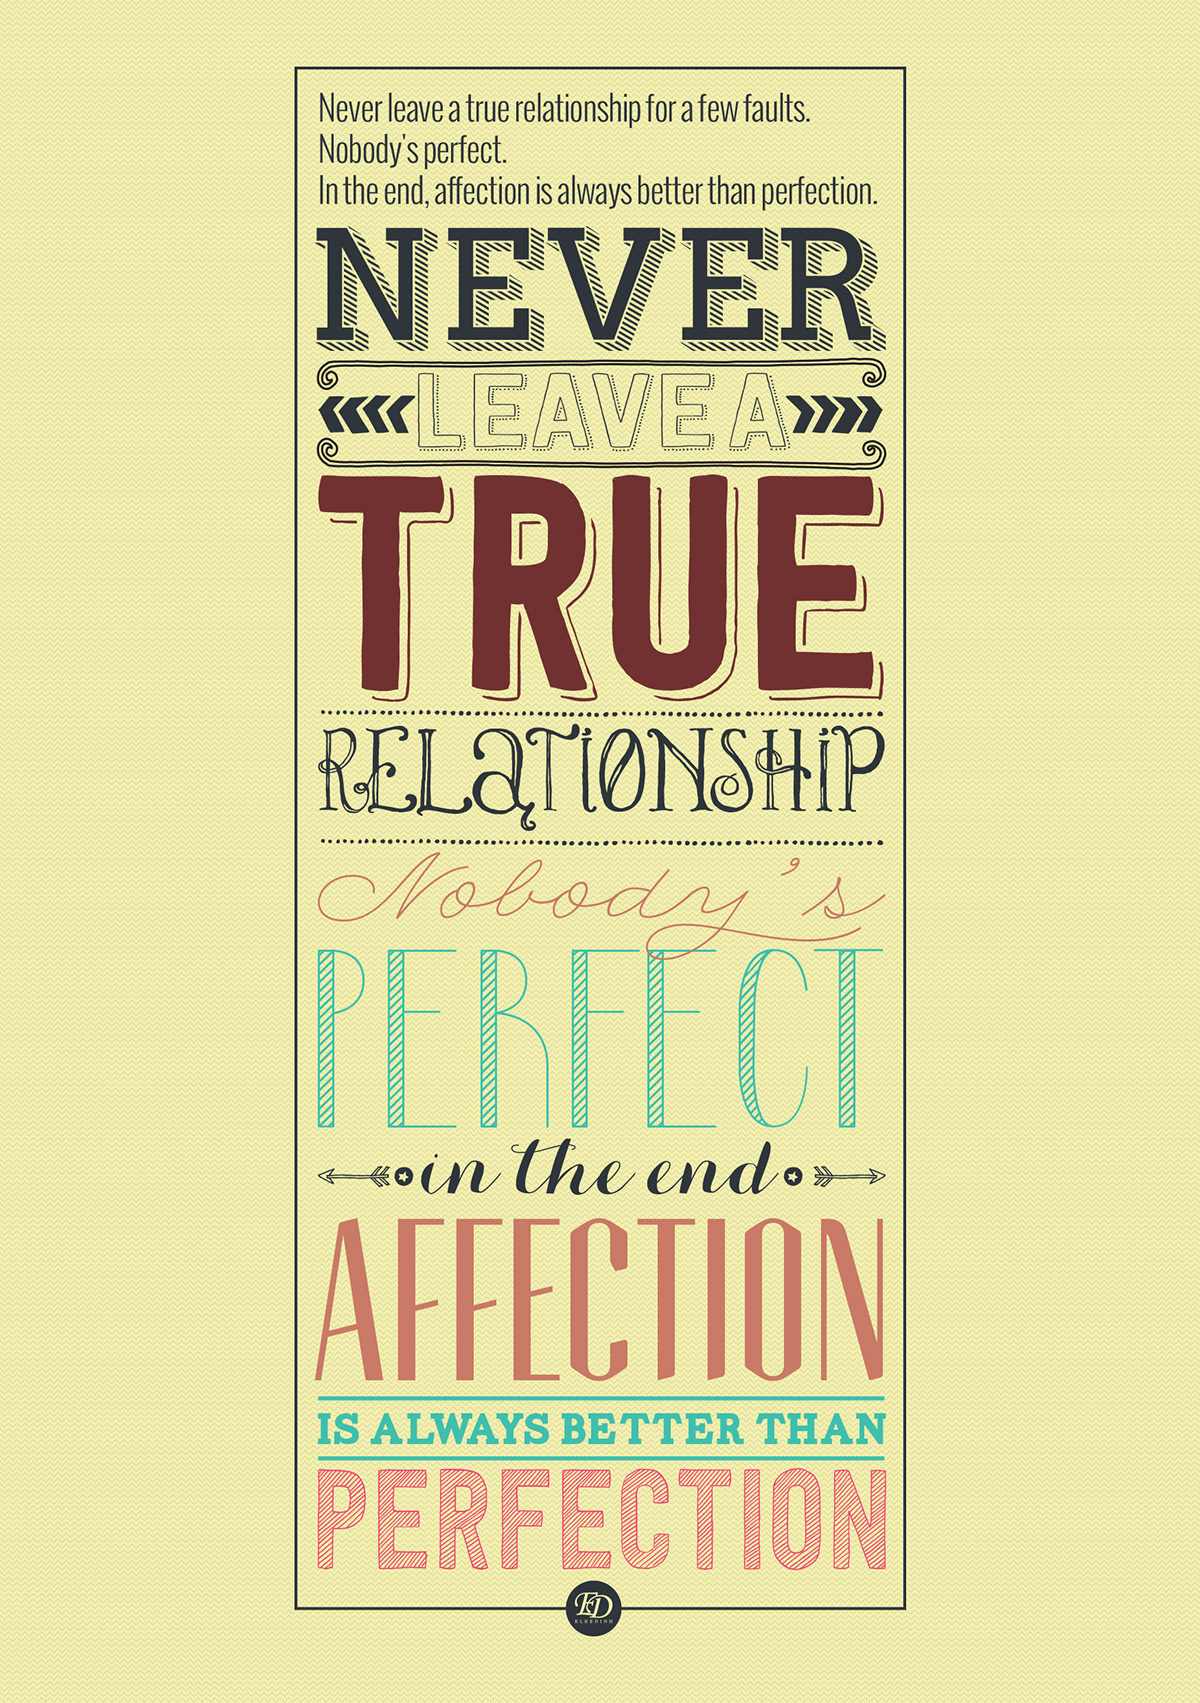 true Love leave never affection perfection end faults